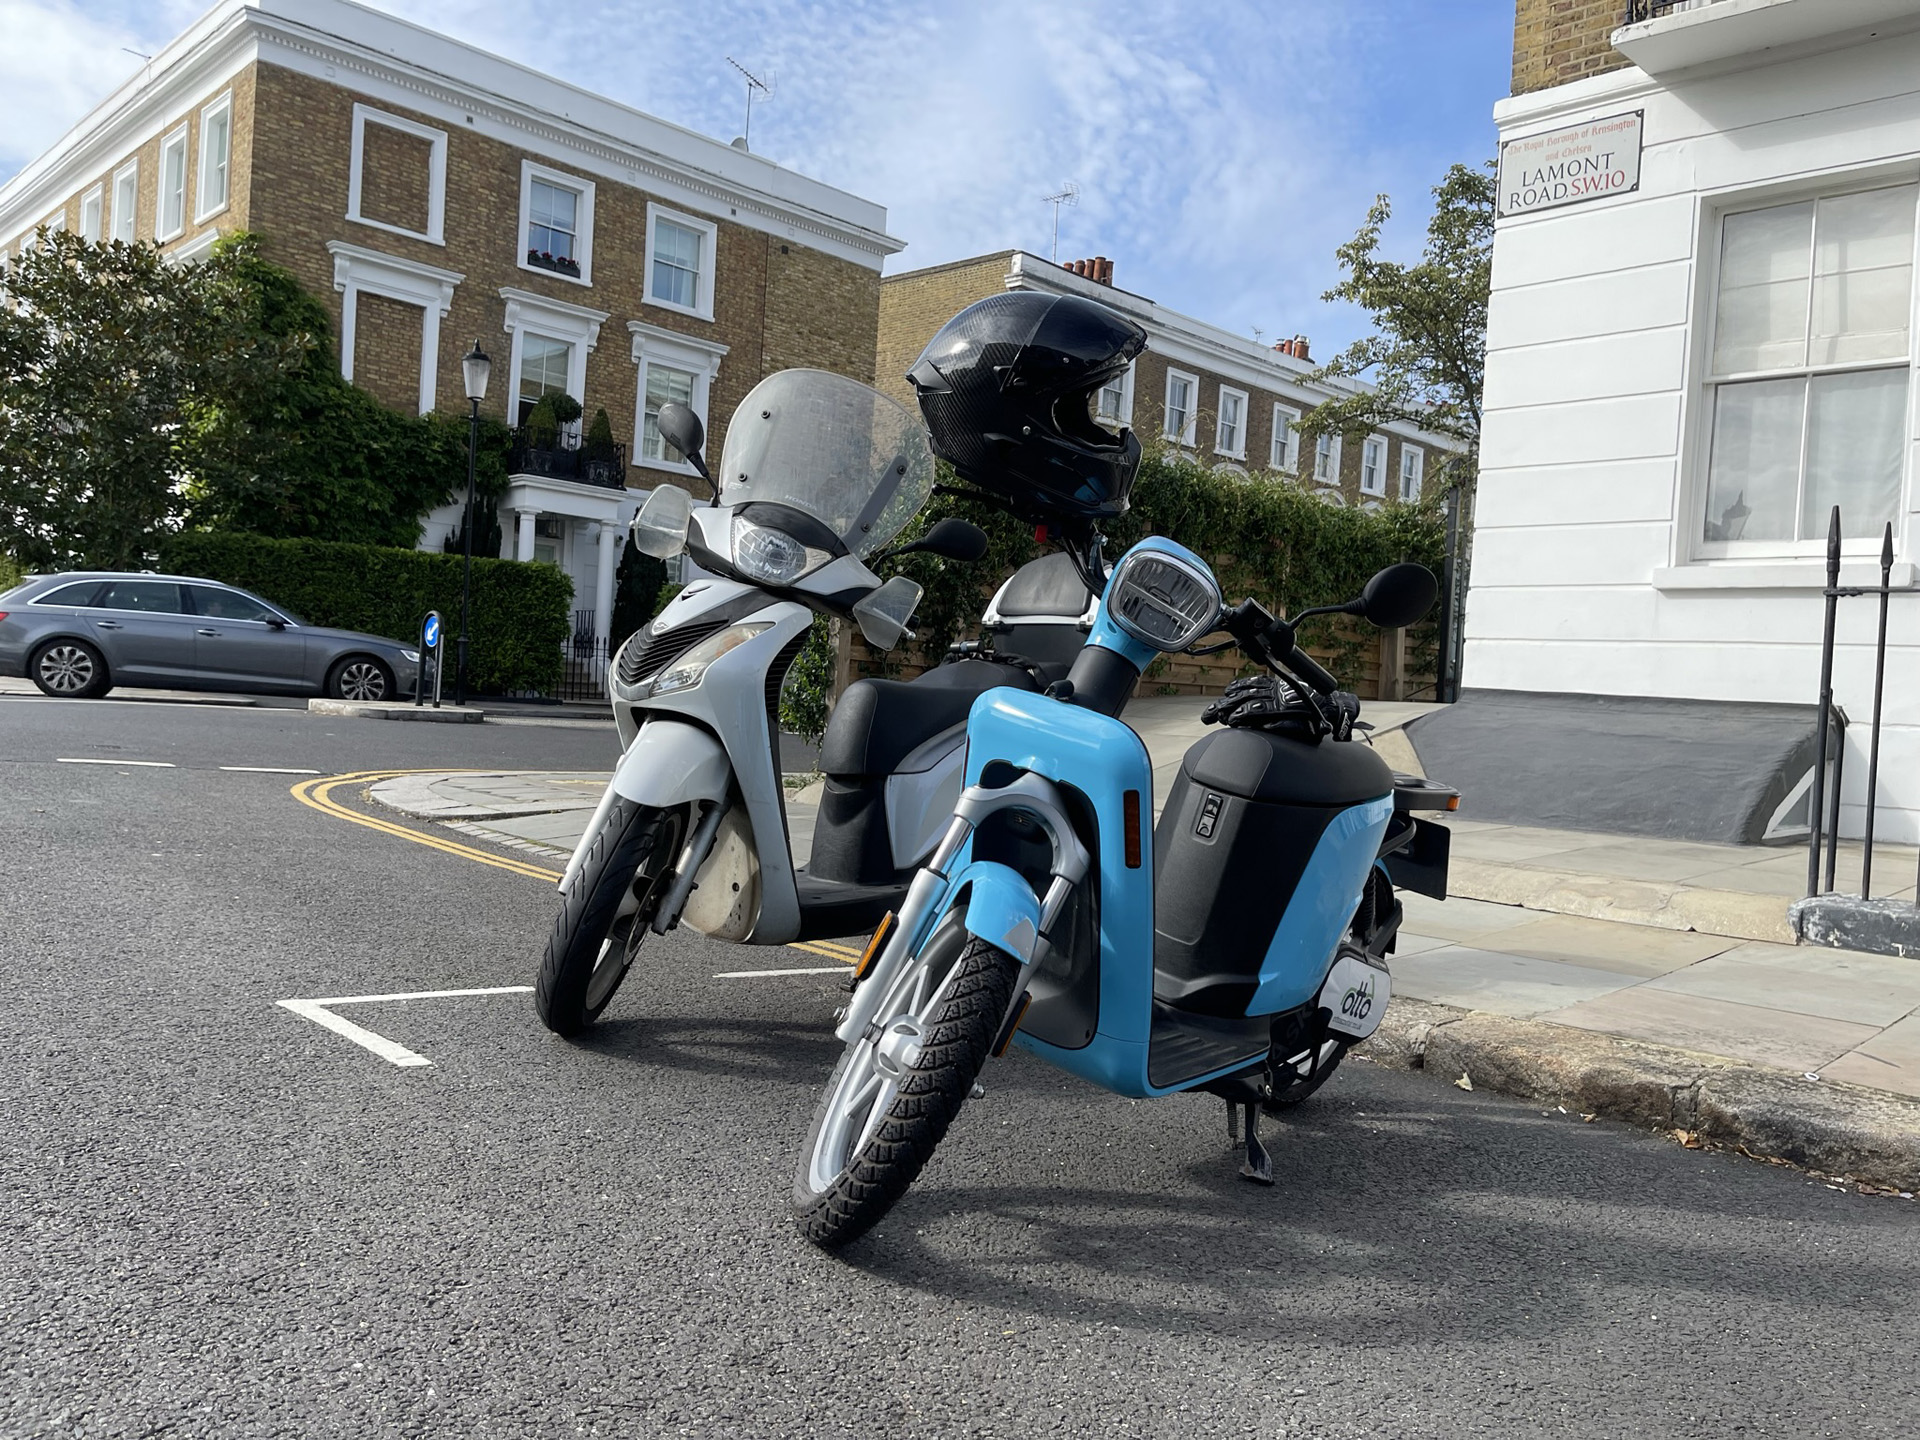 Askoll eSpro 70 next to a combustion engine scooter in Fulham